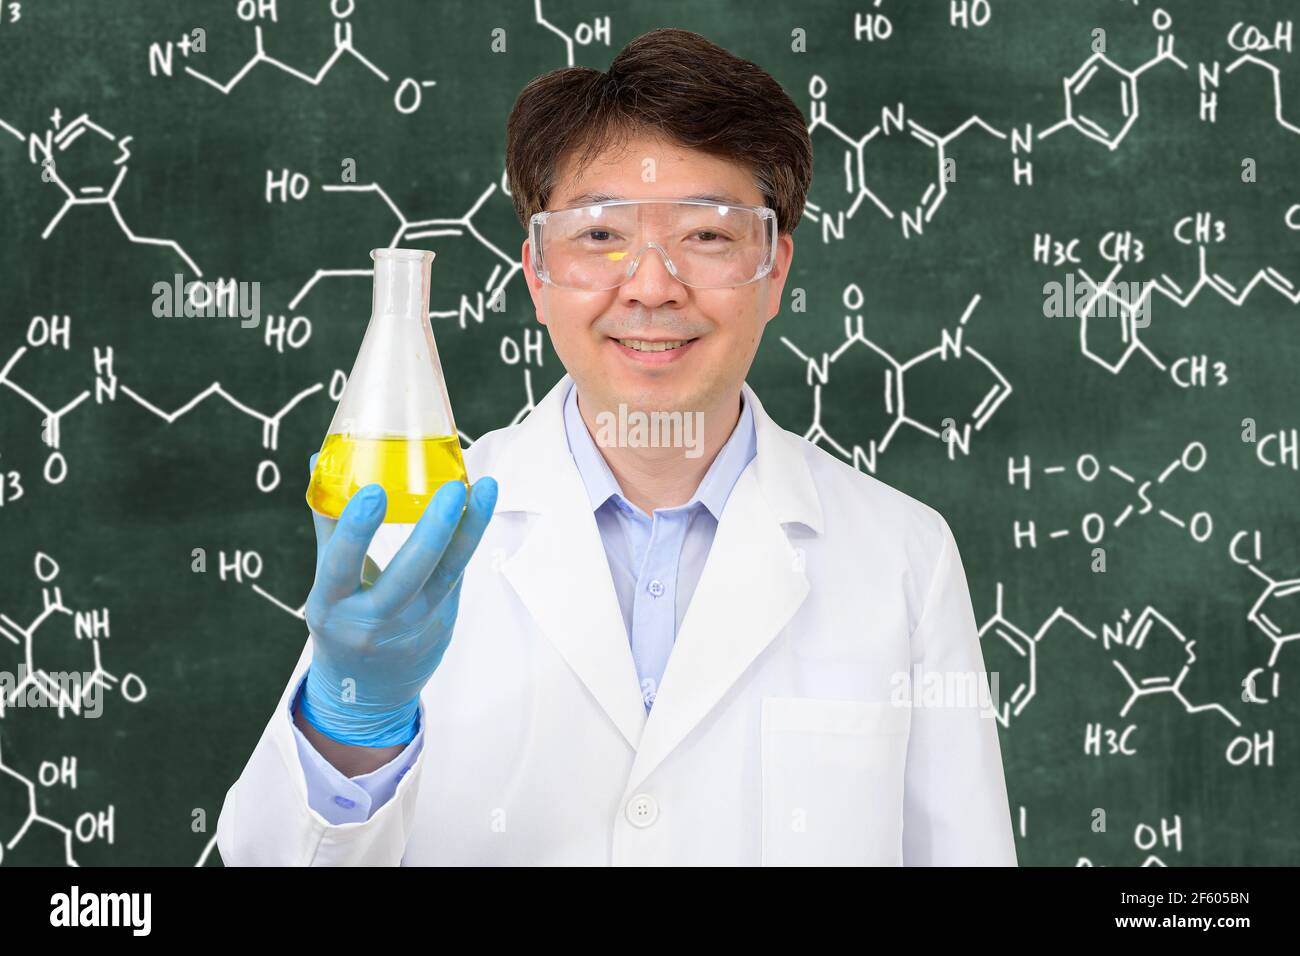 A middle-year Asian male scientist wearing gloves and holding an experimental container in front of a blackboard with a formula written on it. Stock Photo